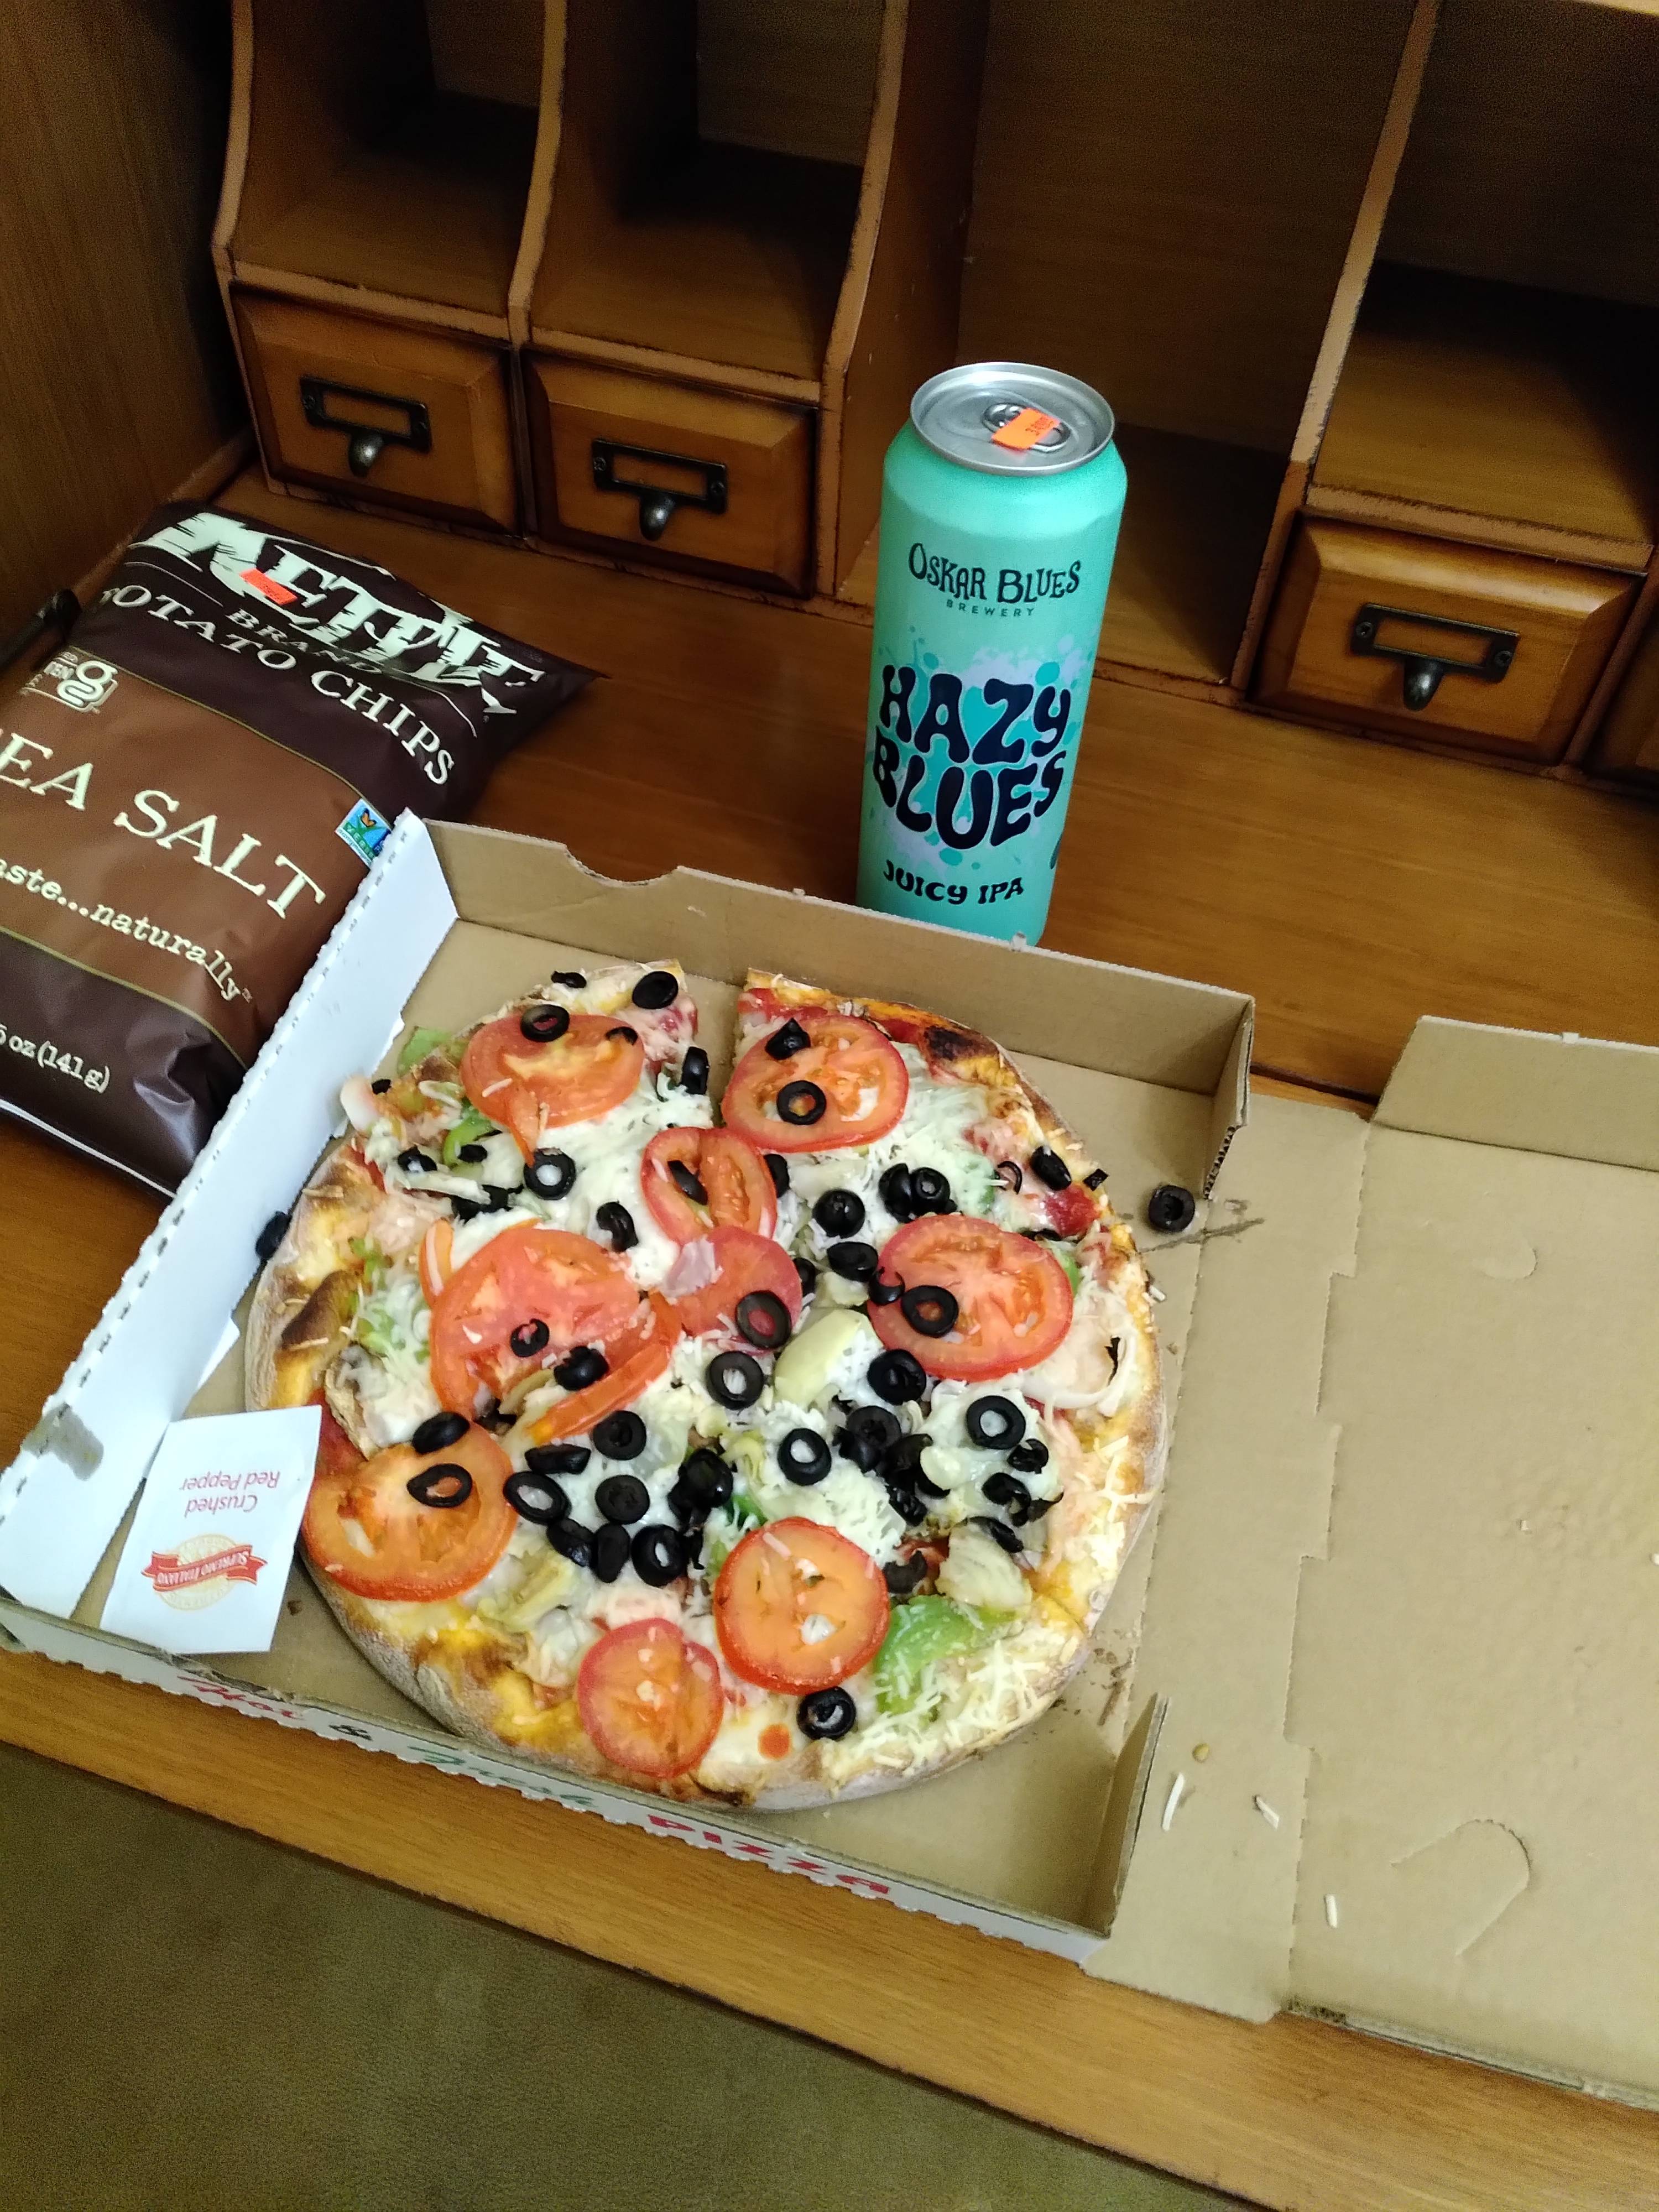 A small pizza, a beer can, and a bag of crisps on a victorian desk.